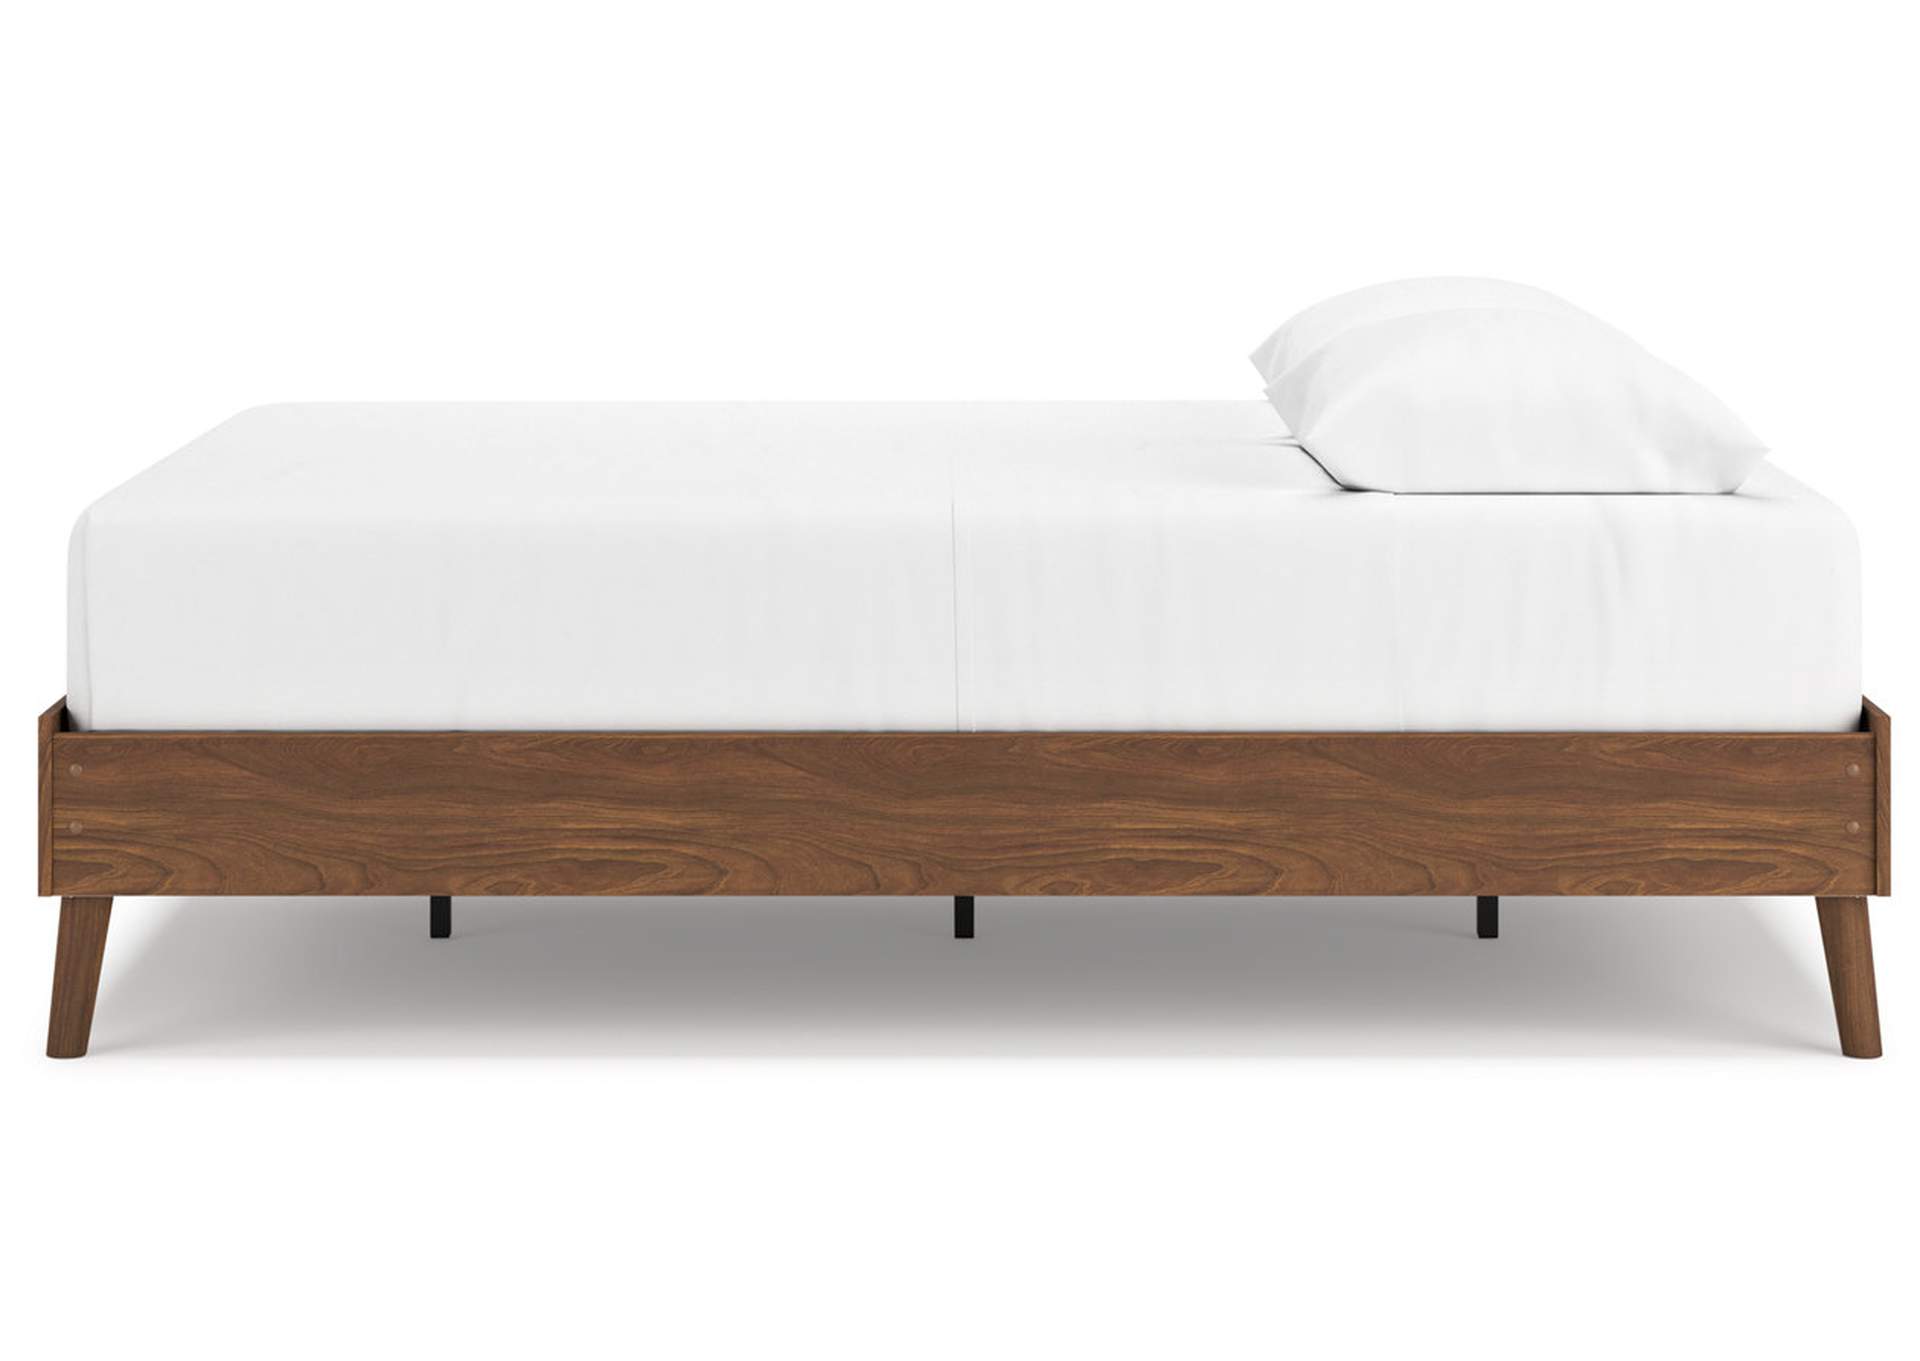 Fordmont Queen Platform Bed,Signature Design By Ashley